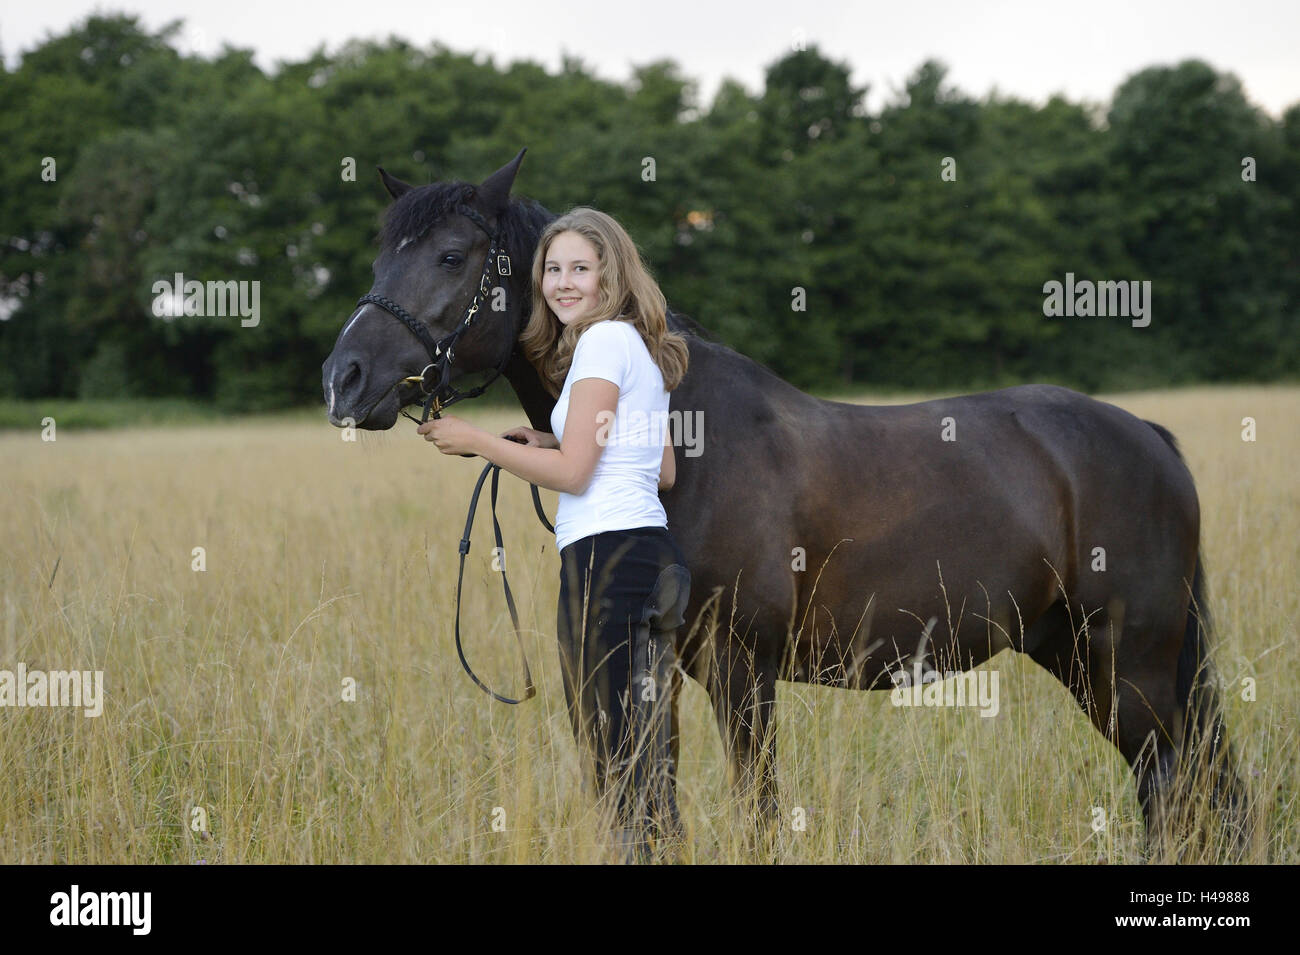 Girls, horse, meadow, stand, view camera, scenery, Stock Photo